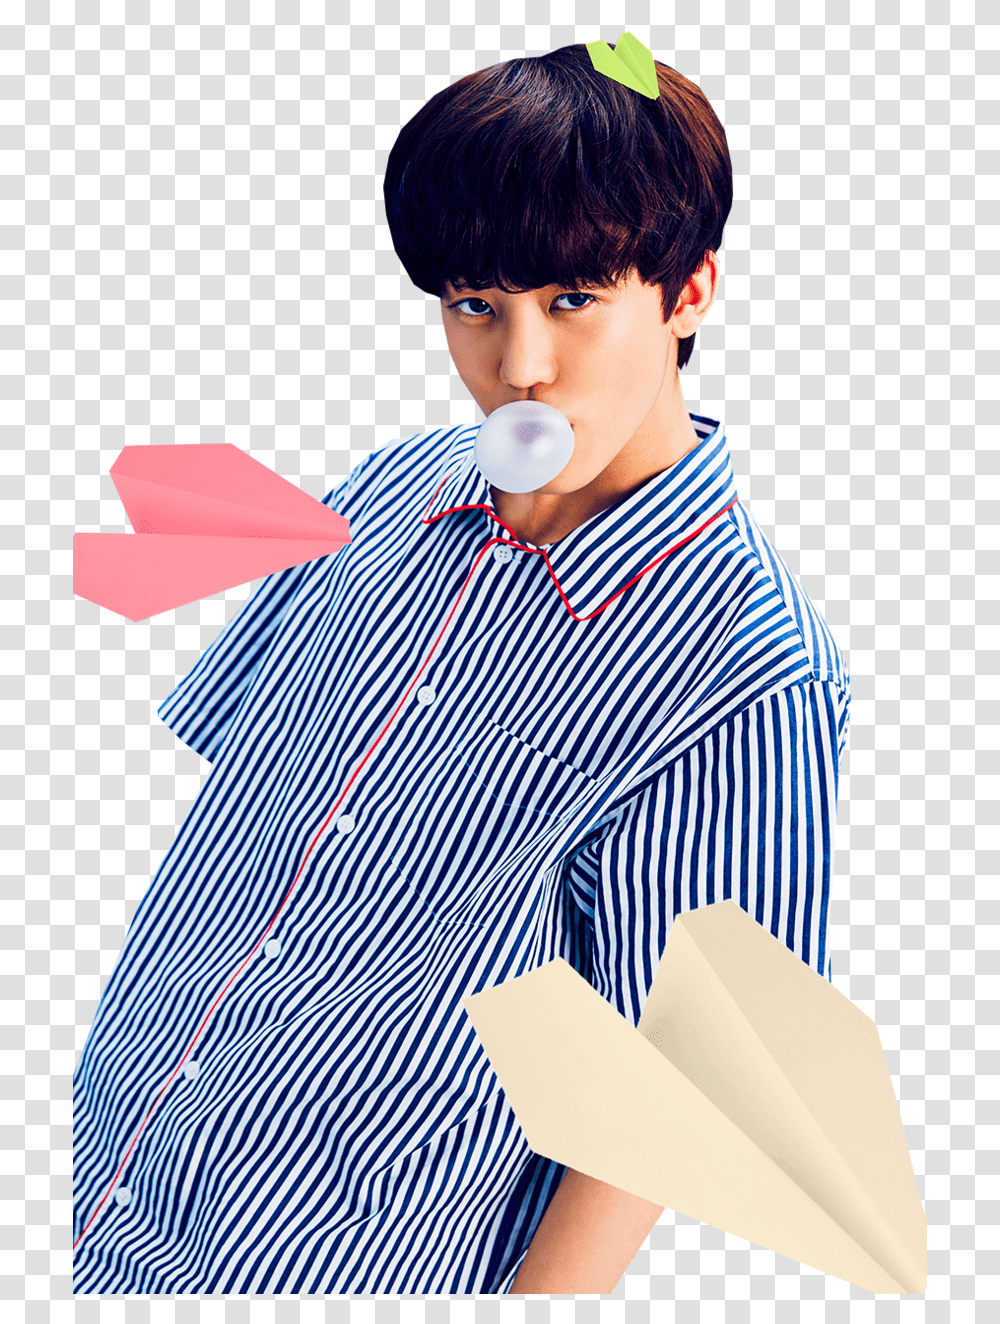 Jaemin Nct And Nct Dream Image Jaemin Nct Dream Chewing Gum, Person, Human, Apparel Transparent Png